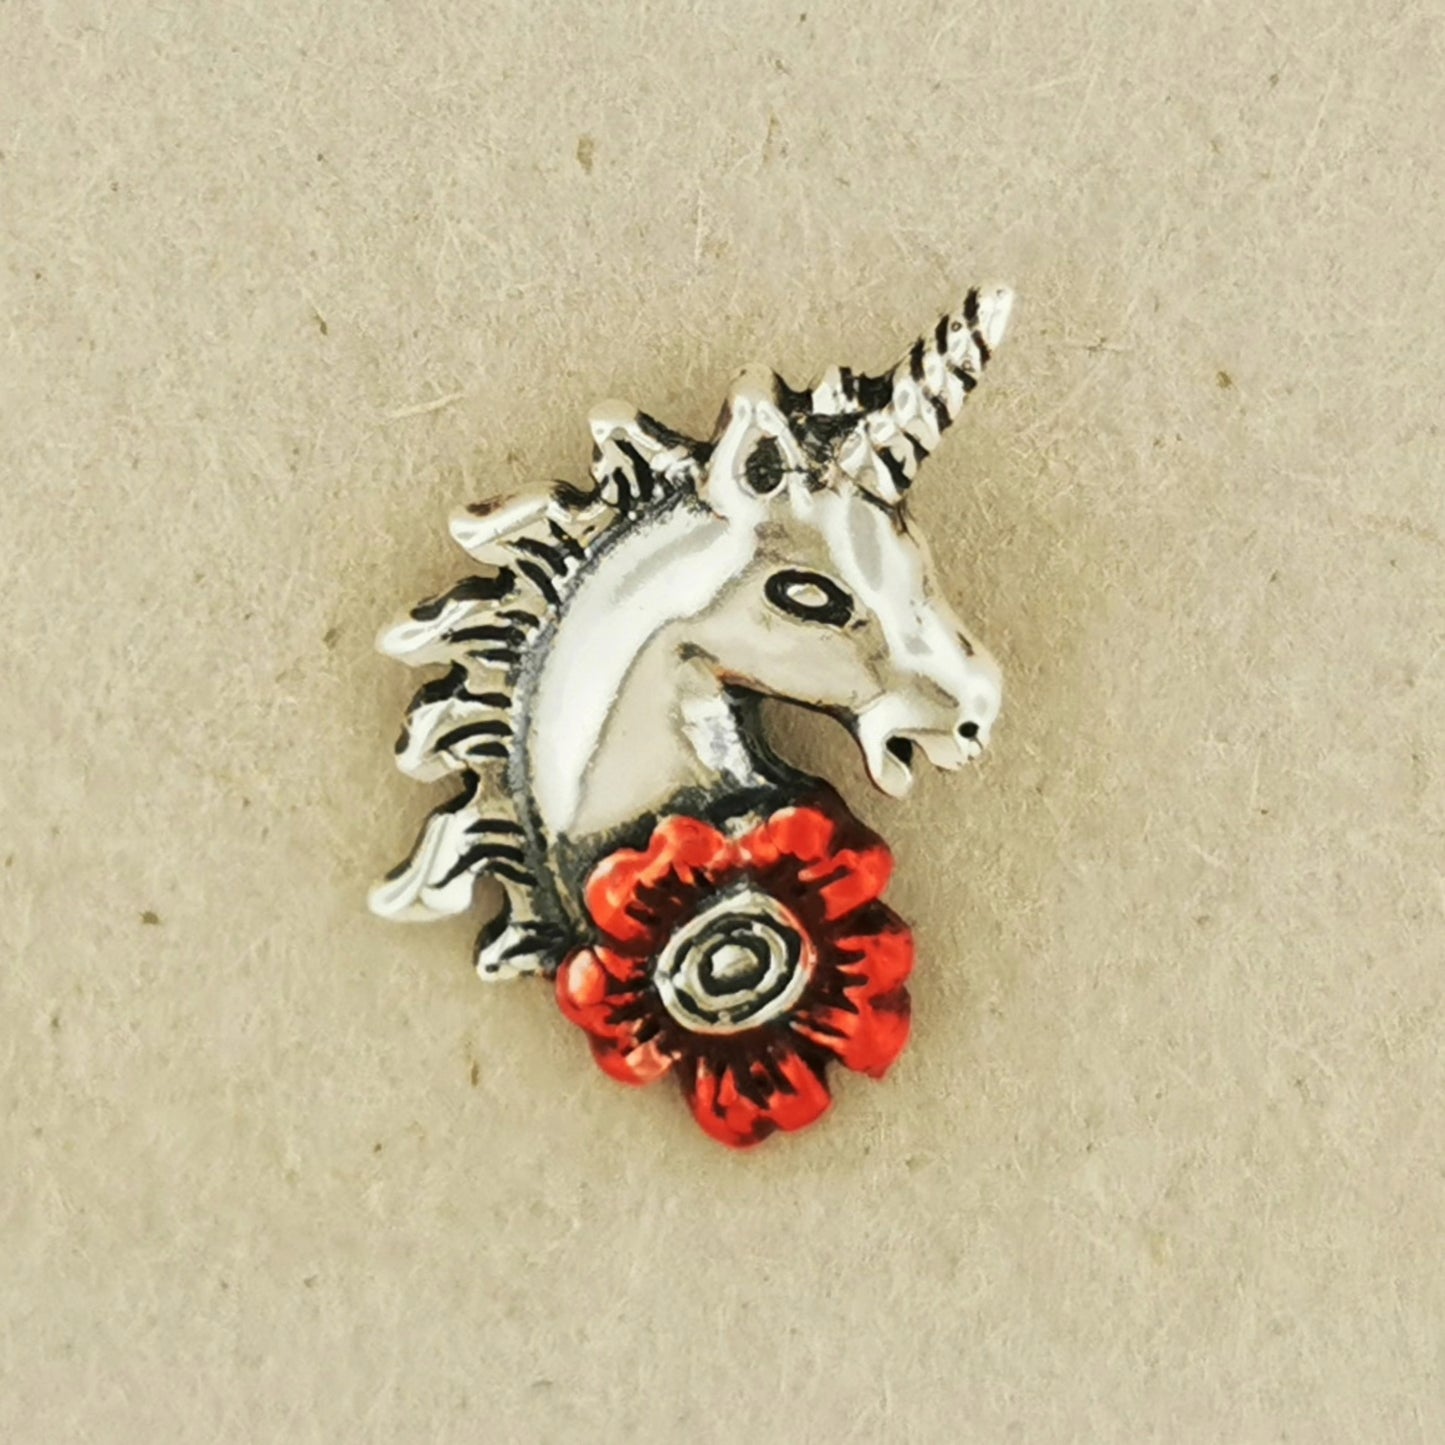 Unicorn Head Charm with Red Enamel in Sterling Silver, Sterling Silver Unicorn Pendant, Silver Unicorn Charm, Unicorn Flower Charm, Silver Fantasy Jewellery, Silver Fantasy Jewelry, Silver Unicorn Jewelry, Silver Unicorn Jewellery, Enamelled Pendant